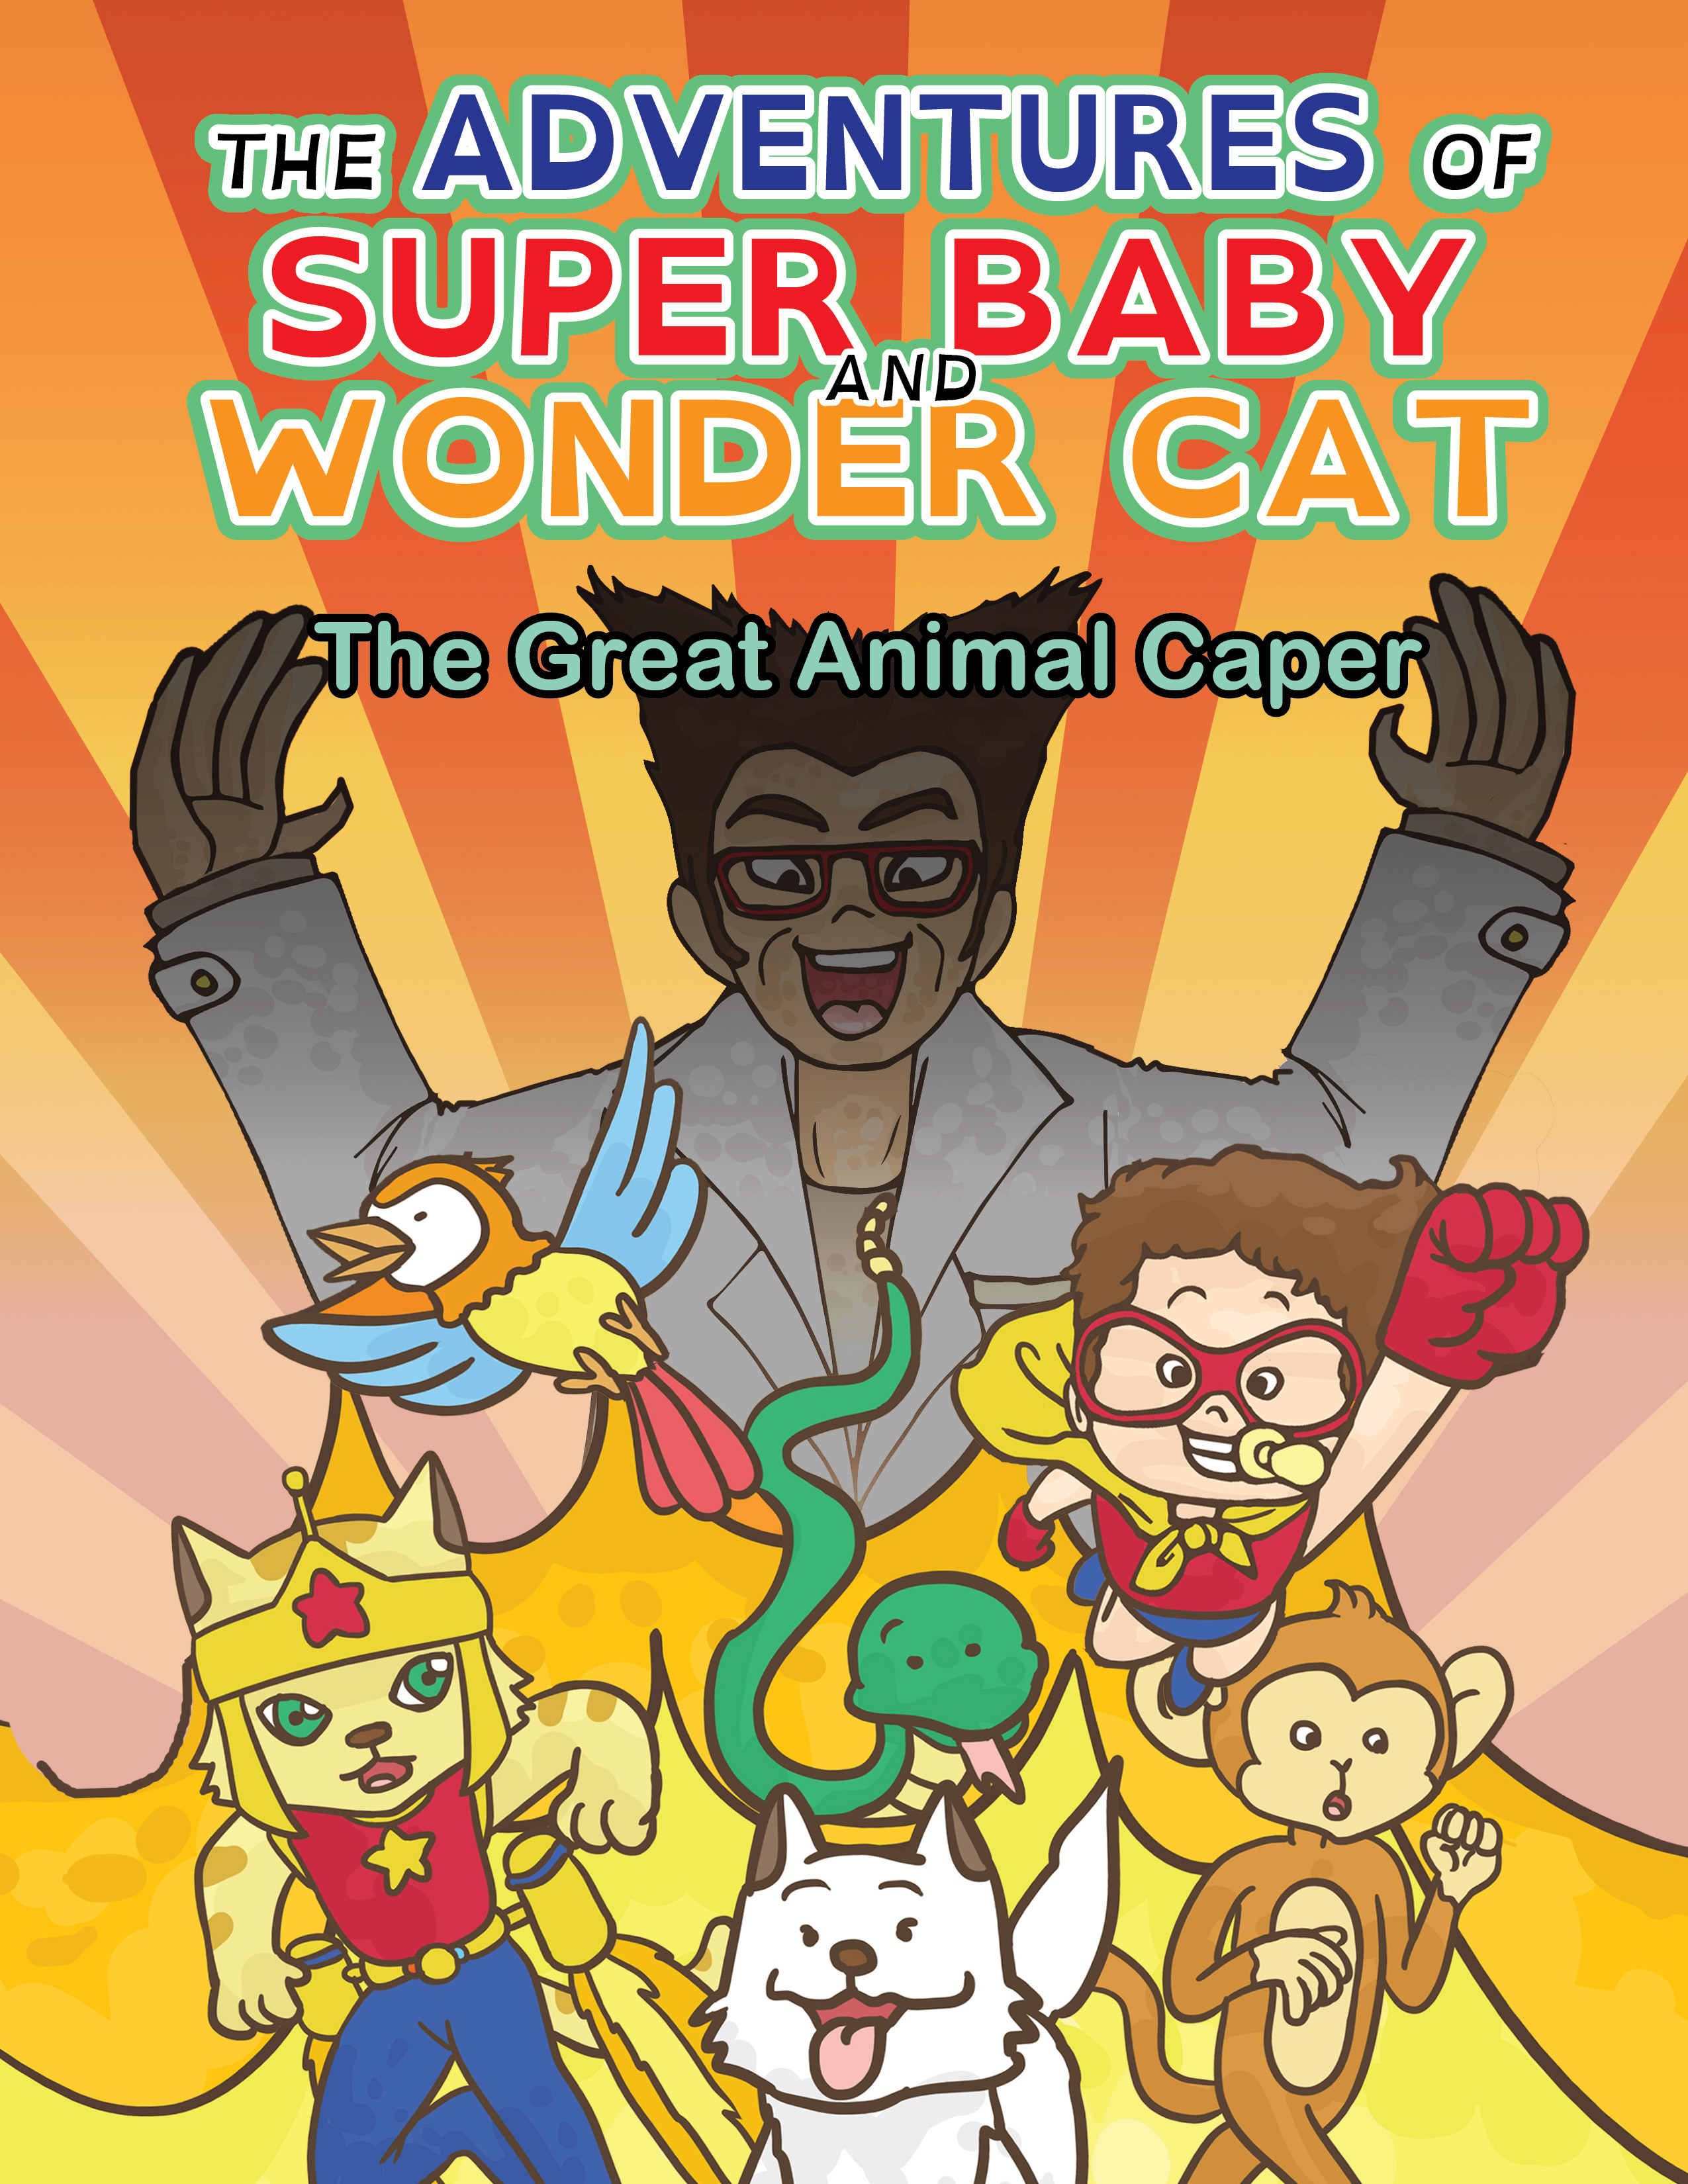 The Adventures of Super Baby: The Great Animal Caper